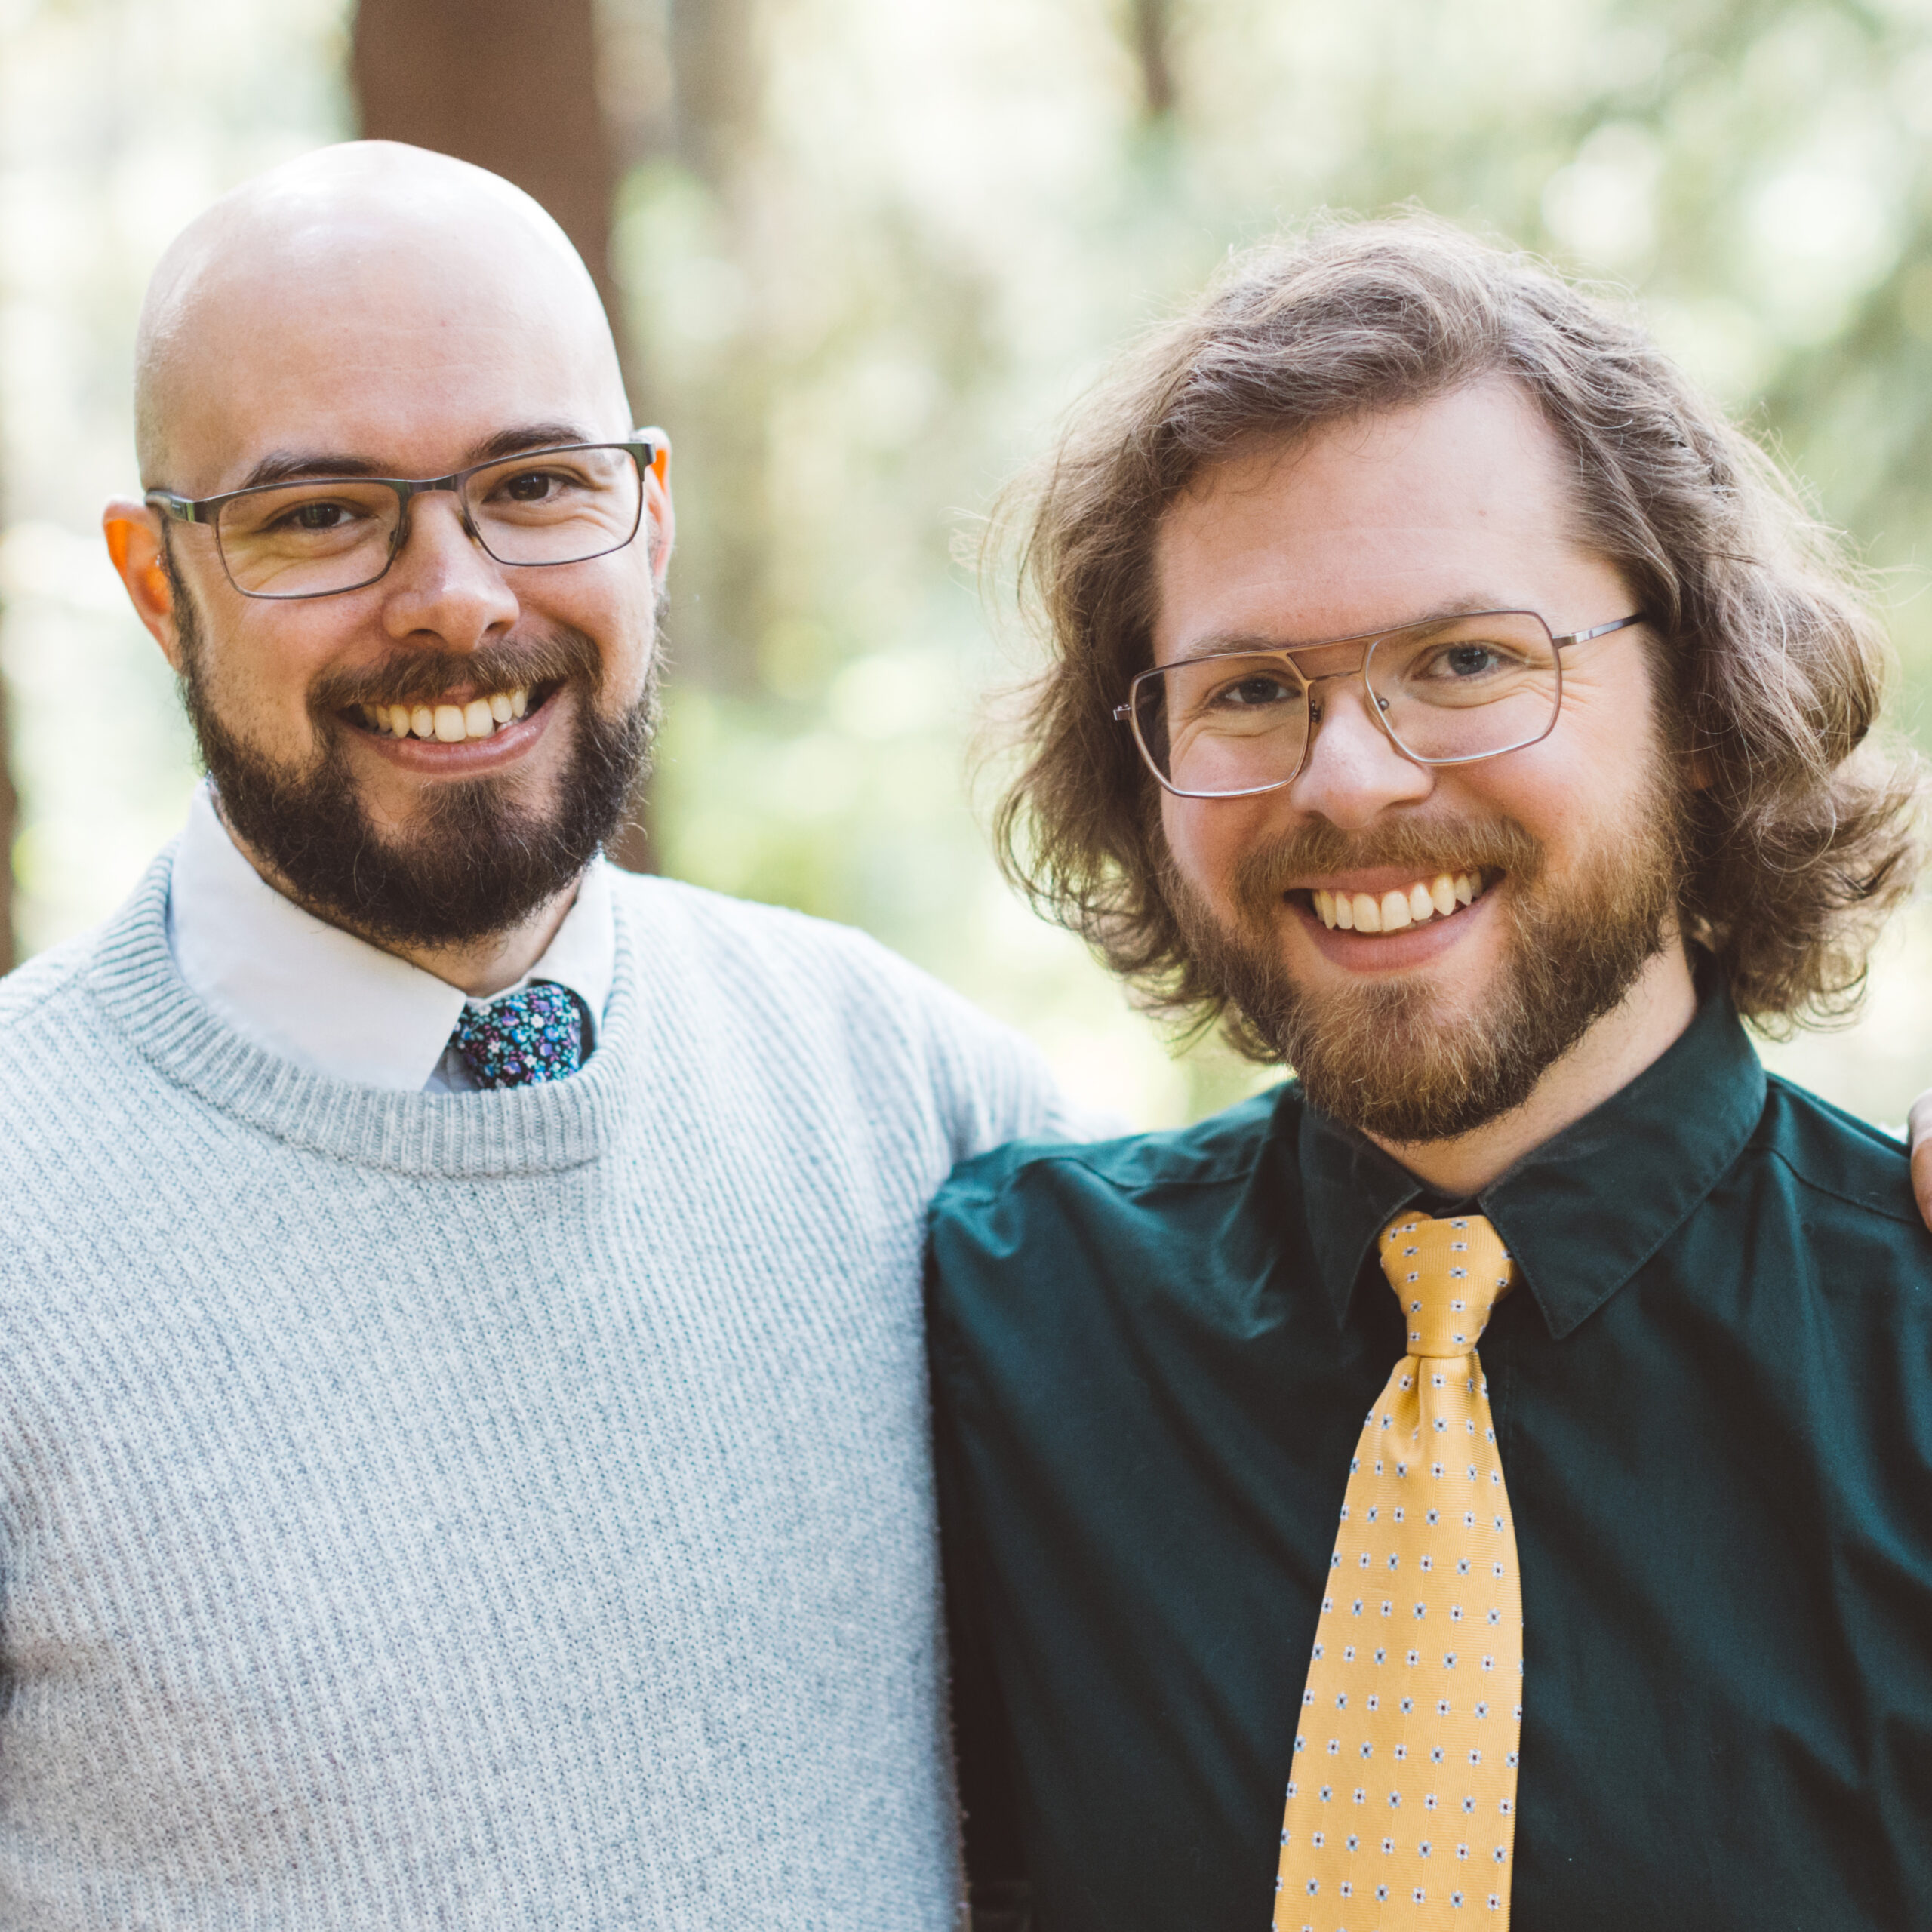 Robert and Thomas are one of many OAFS families seeking to adopt a child.